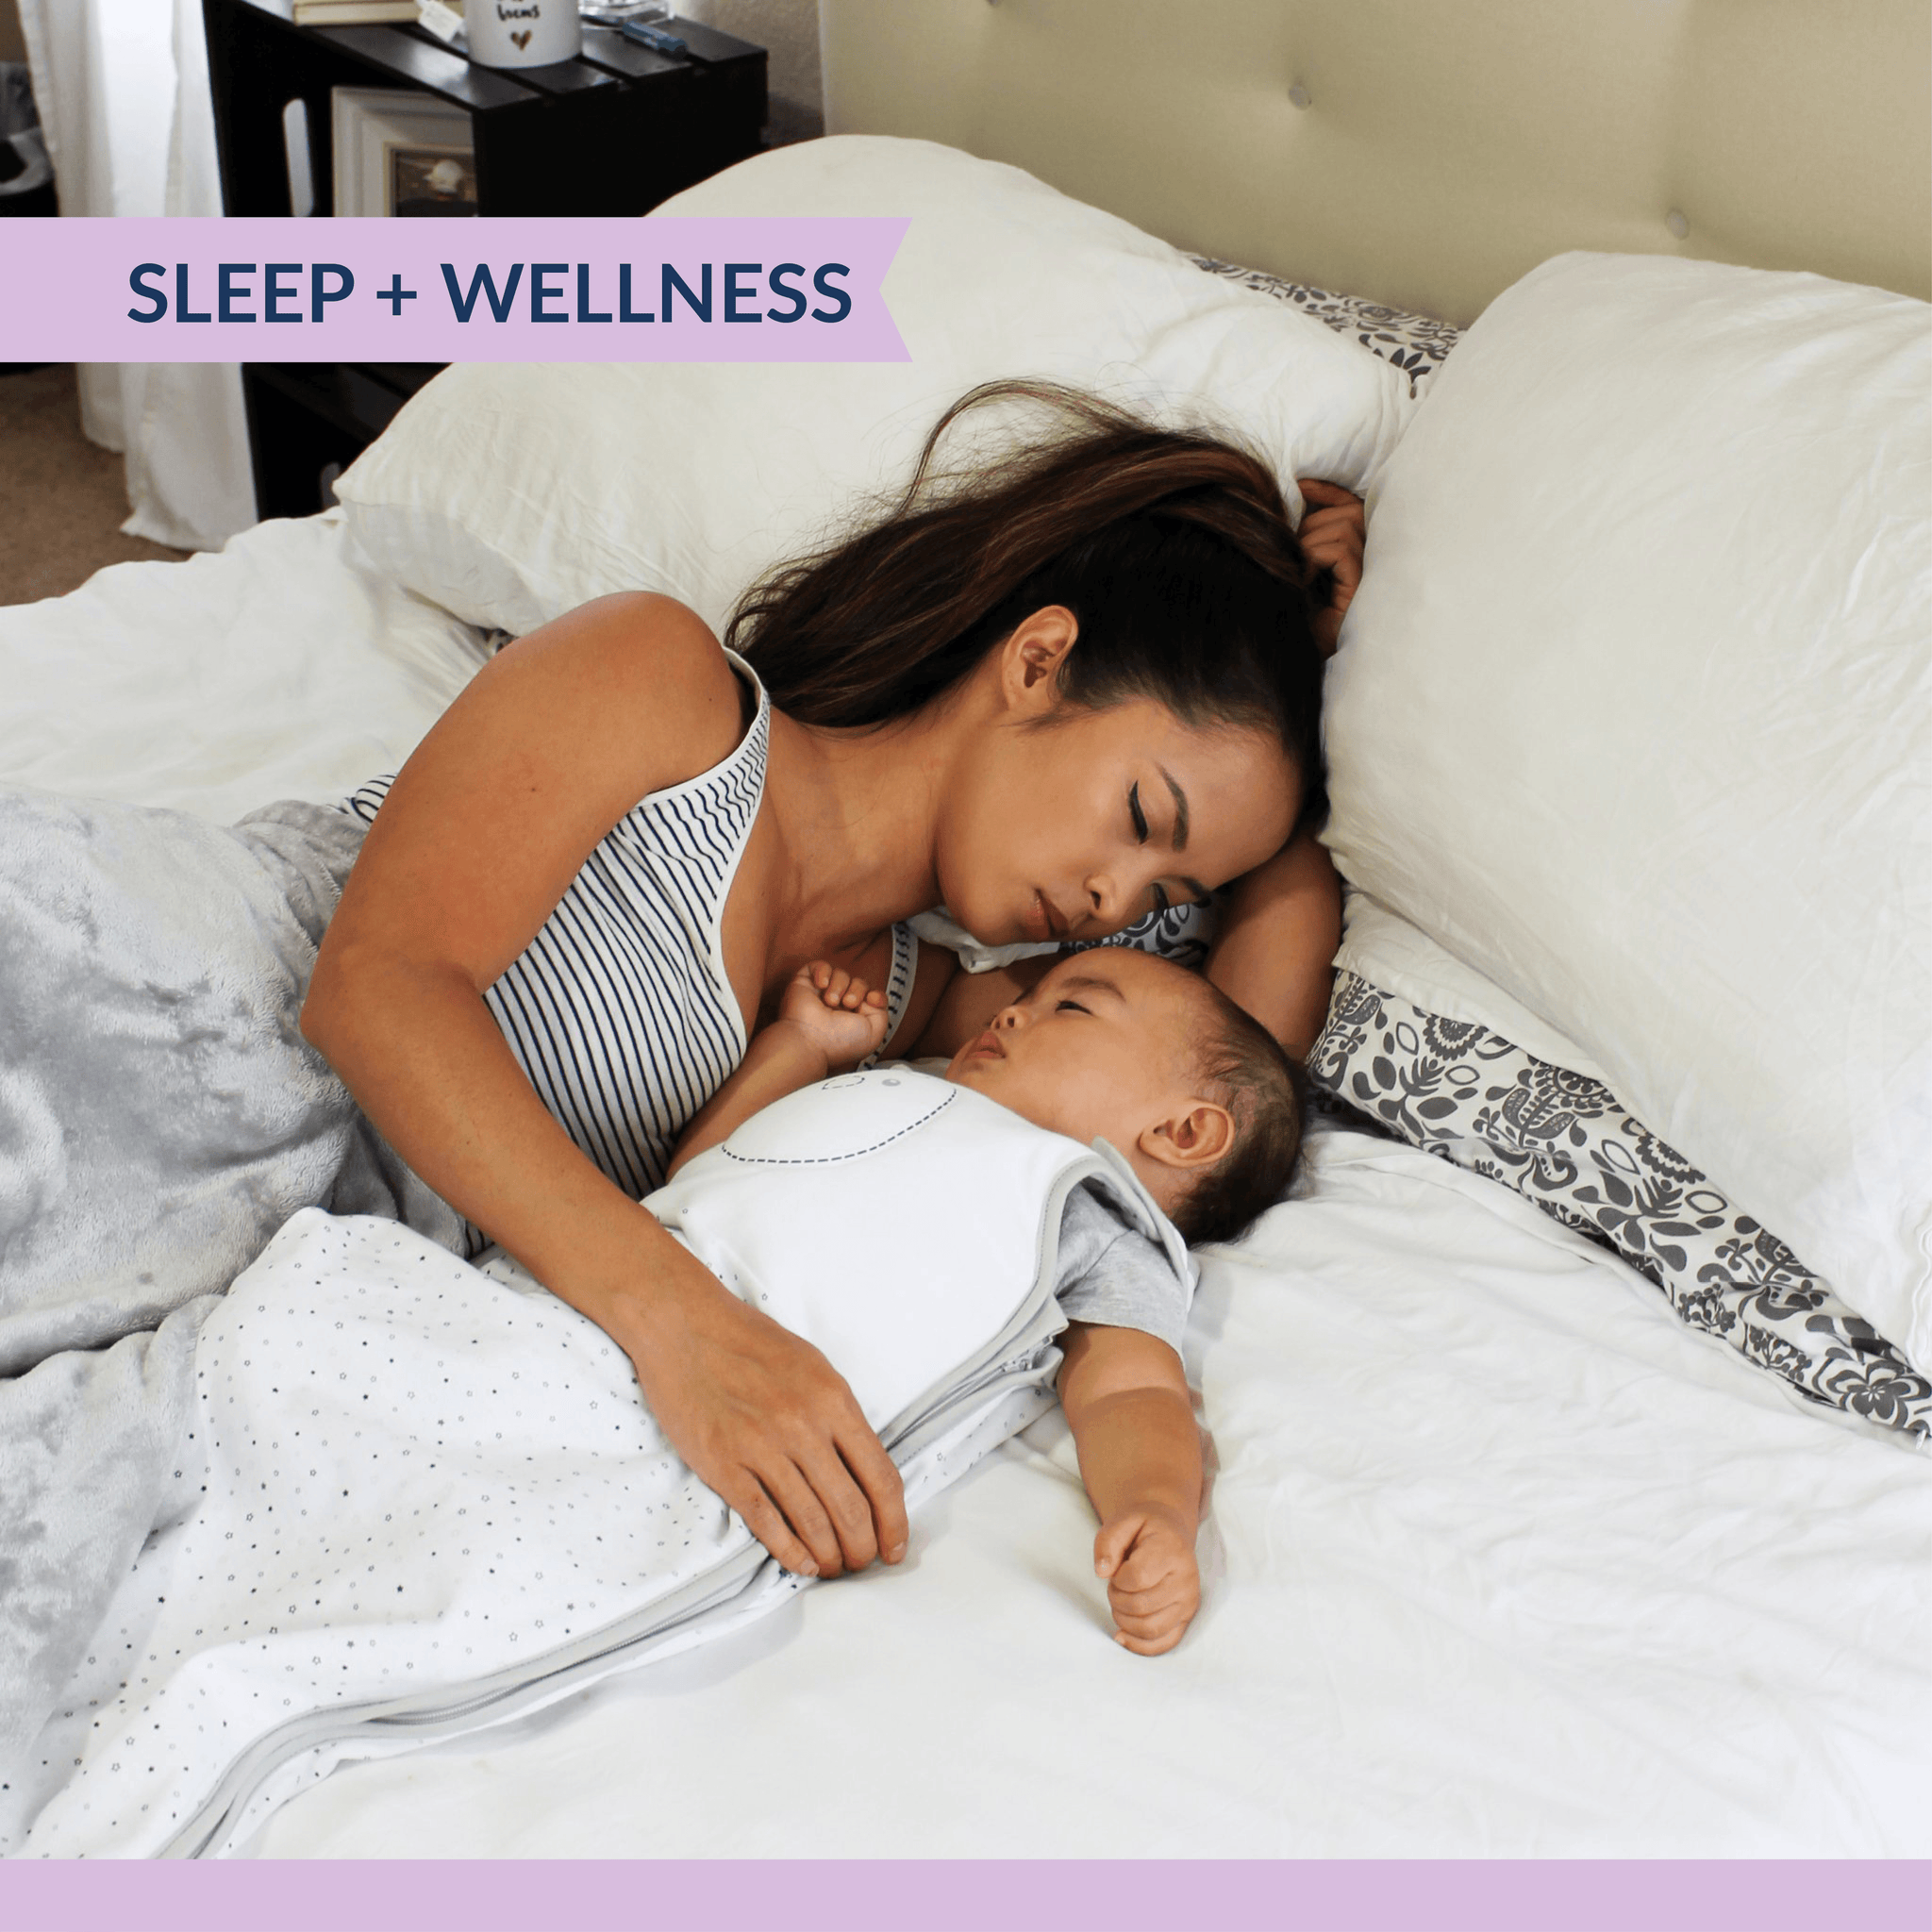 Co-Sleeping and Bed Sharing — Pros and Cons, Safety for Babies